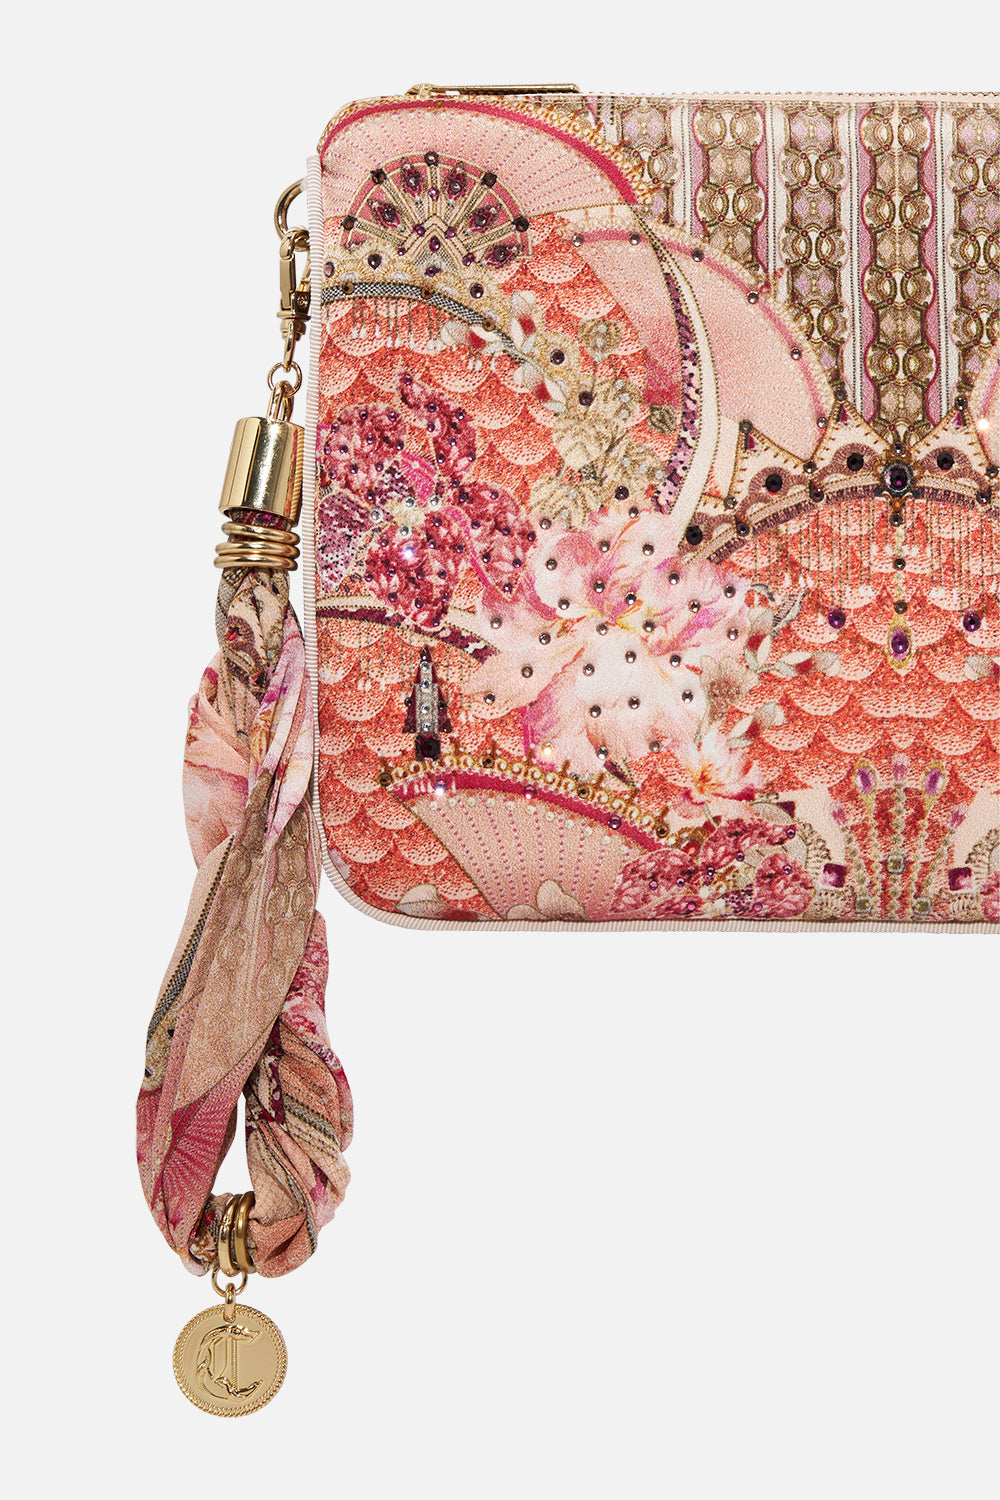 Detail view of CAMILLA pink silk clutch bag in Adore Me print